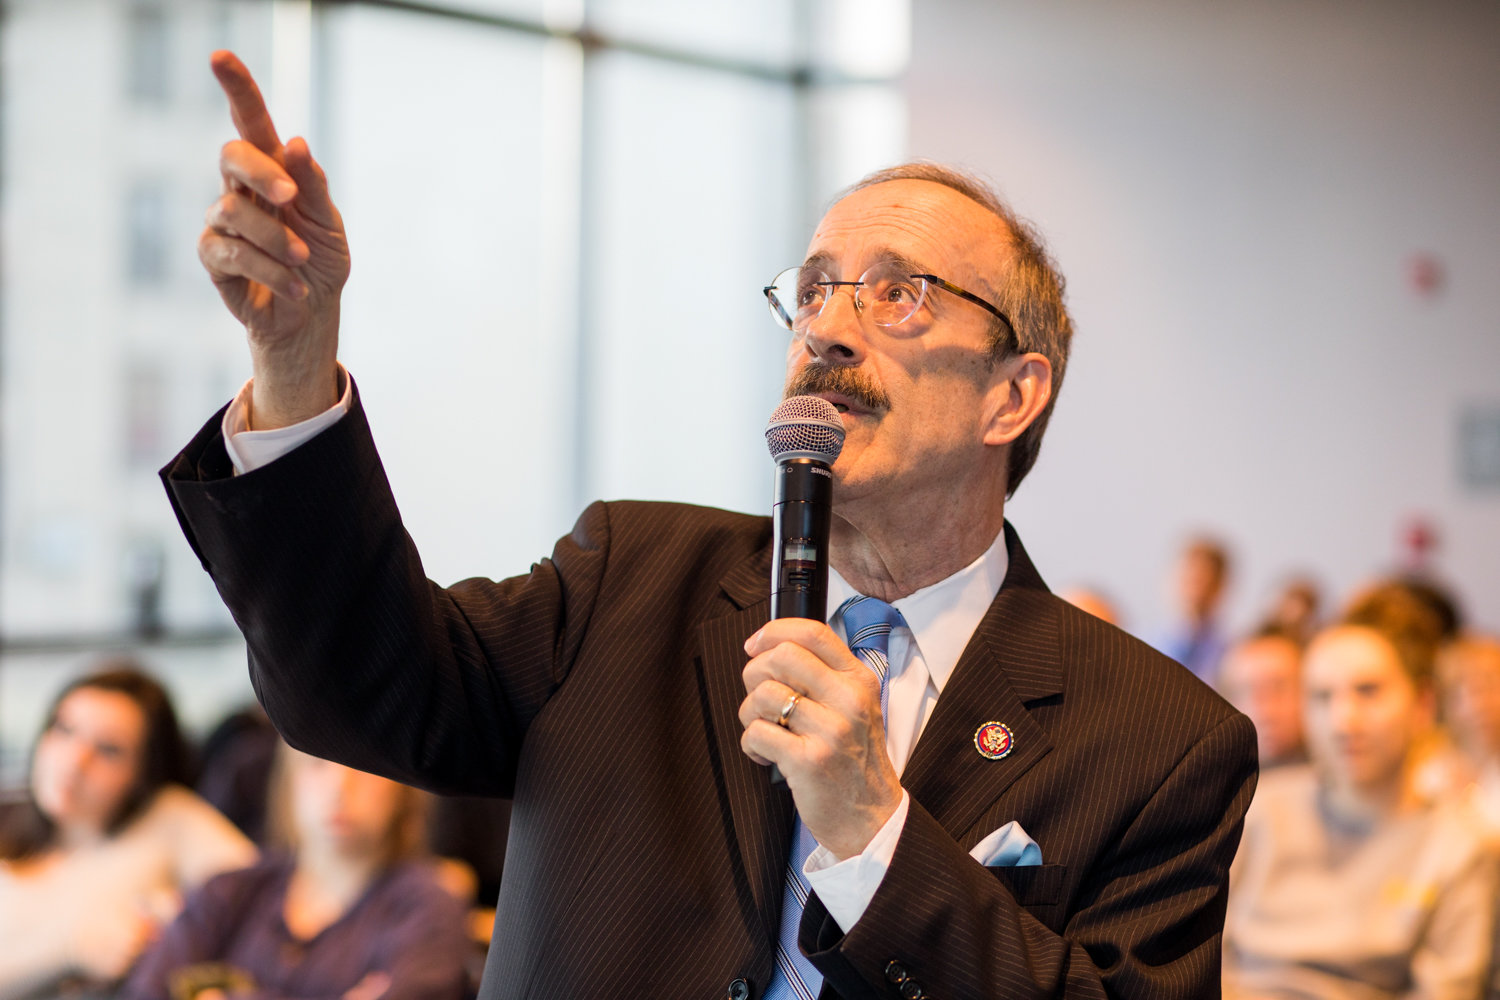 U.S. Rep. Eliot Engel faces challenges from Andom Ghebreghiorgis and Jamaal Bowman, the latter of whom has the backing of Justice Democrats, which backed then-candidate Alexandria Ocasio-Cortez in her successful insurgent bid against then-U.S. Rep. Joe Crowley.